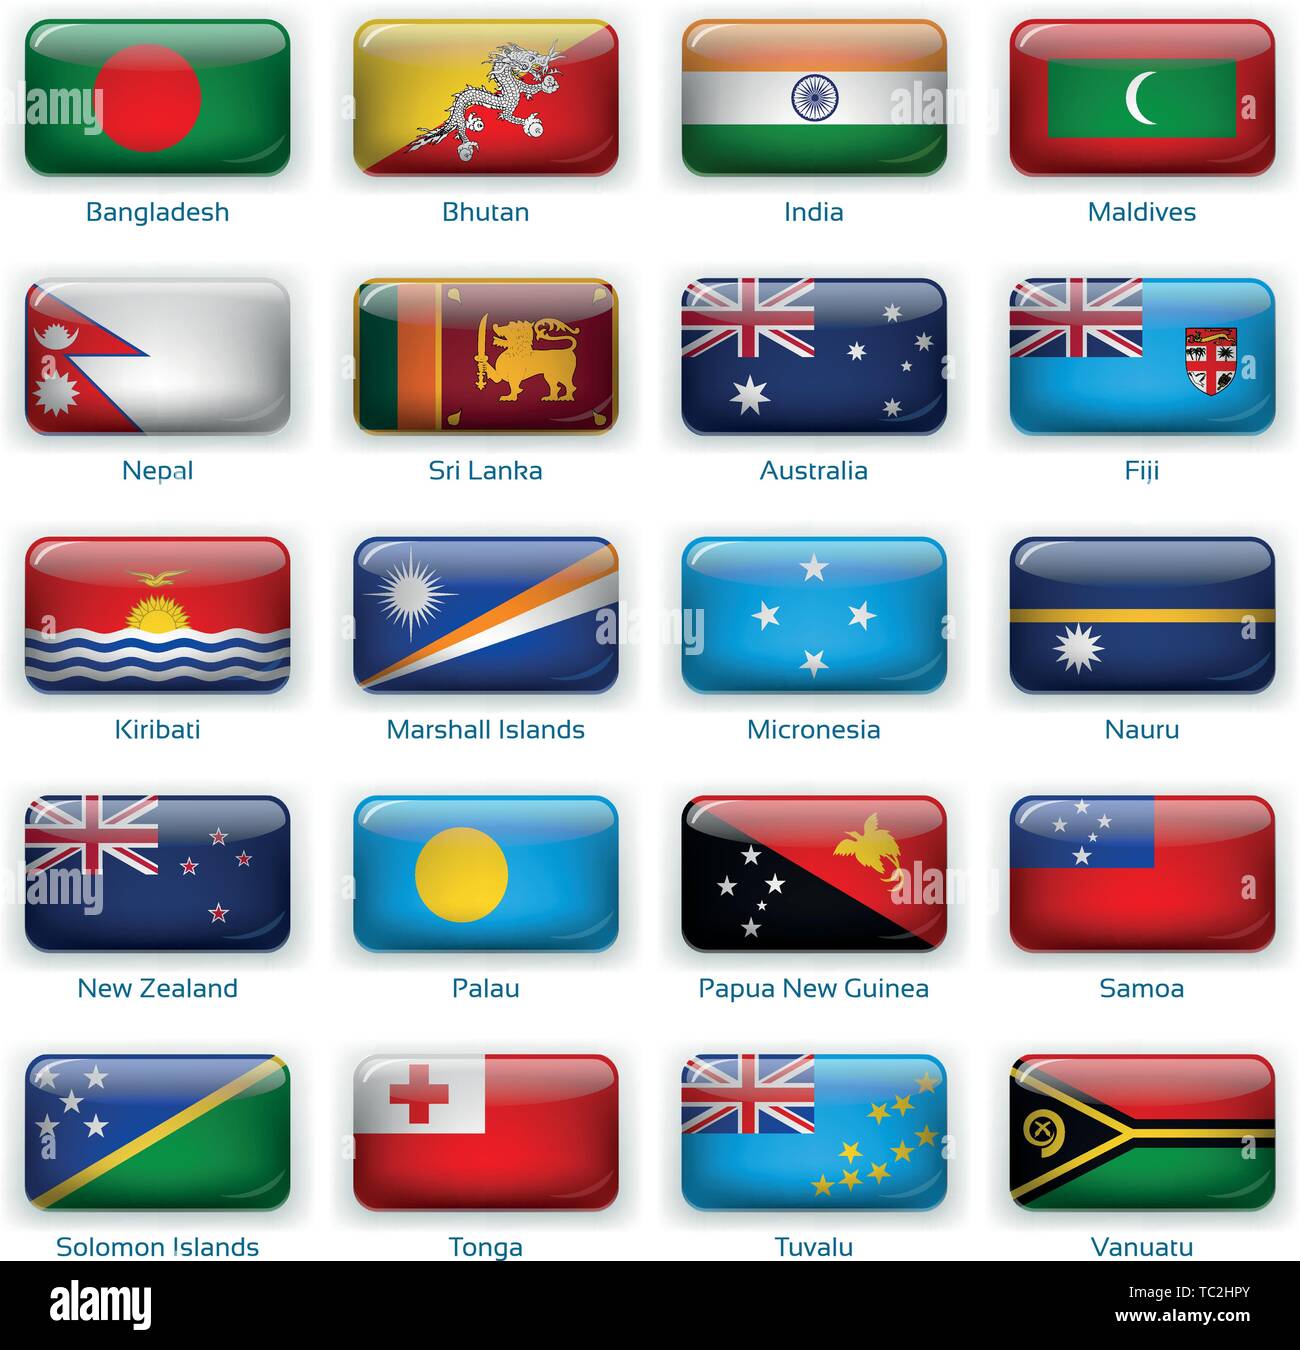 Button flags South Asia and Oceania. Vector illustration. 3 layers. Shadows, flat flag you can use it separately, button. Collection of 220 world flags. Accurate colors. Easy changes. Stock Vector